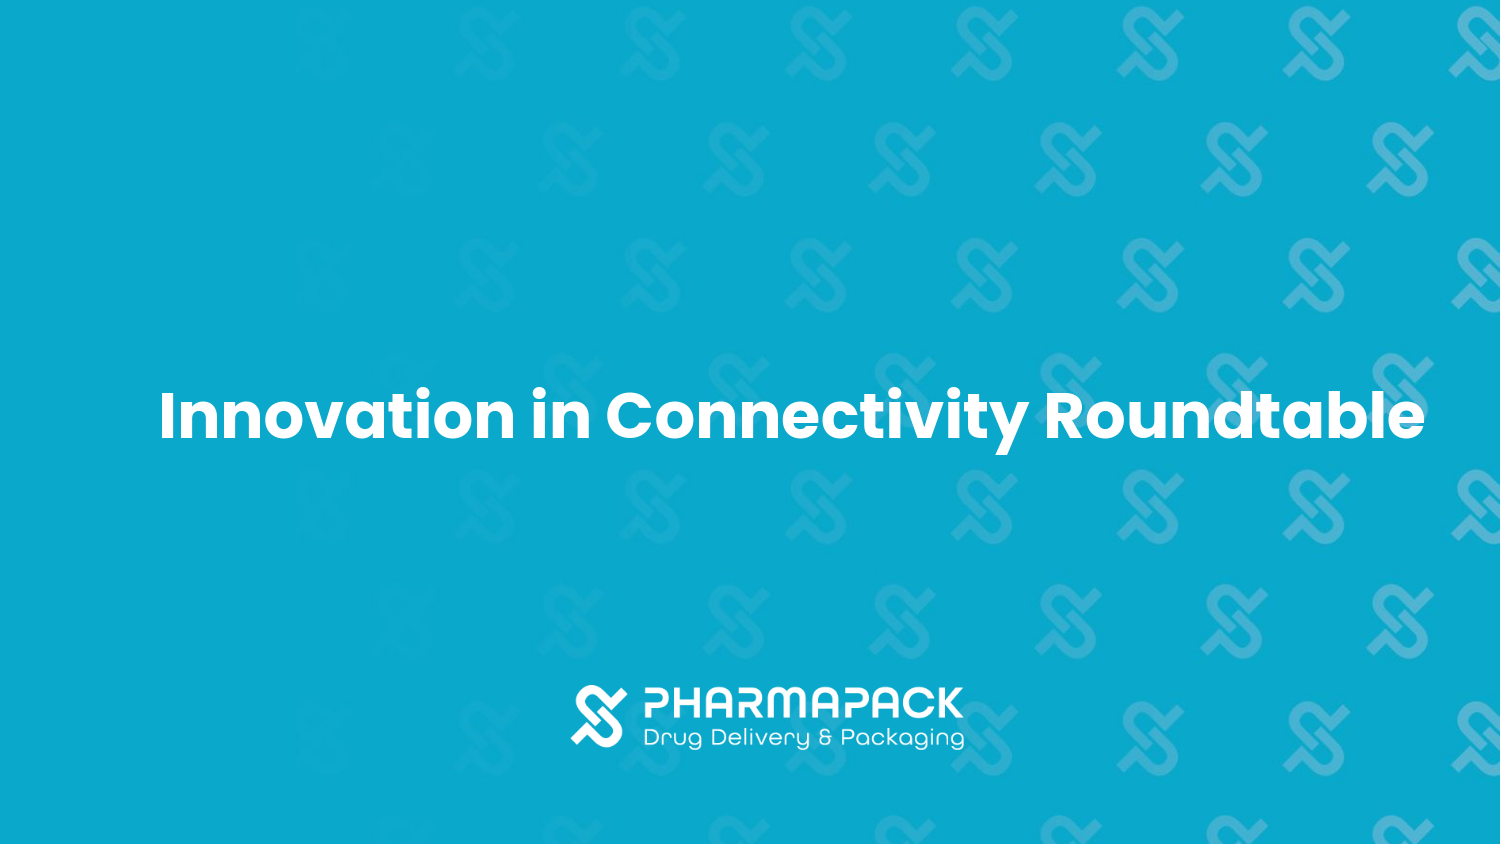 Innovation in Connectivity Roundtable pt. 2